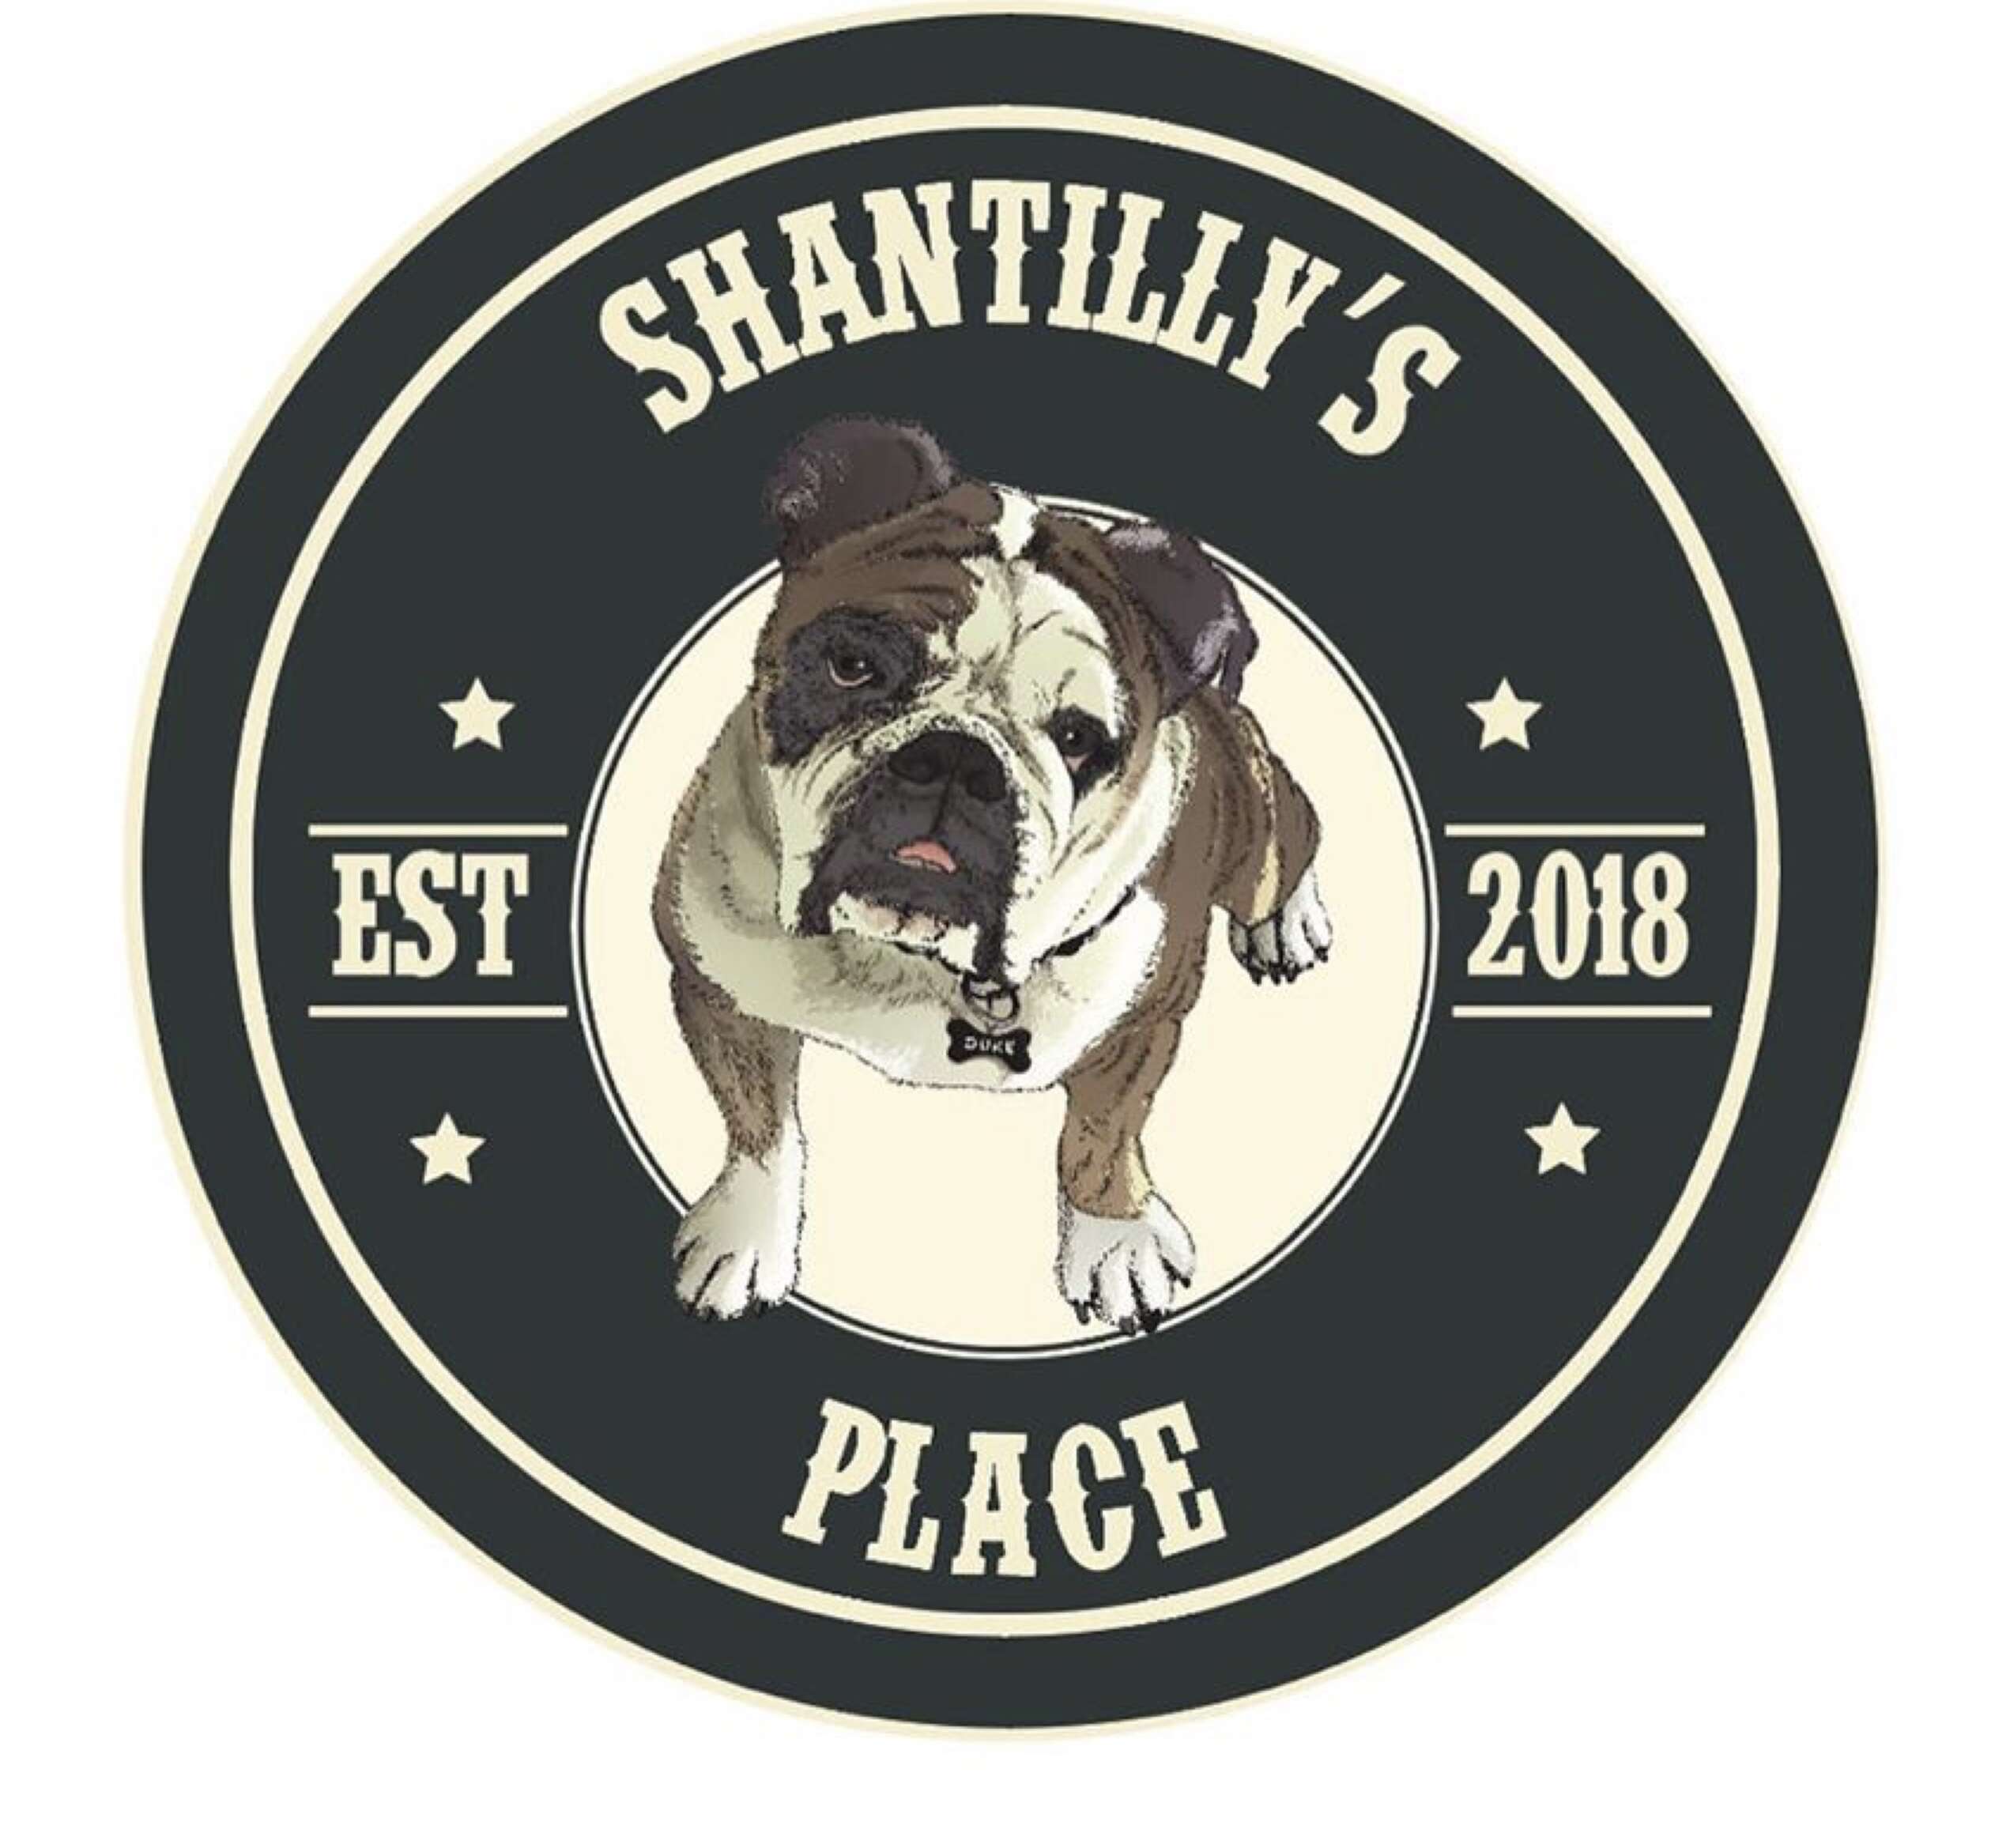 Shantilly's Place